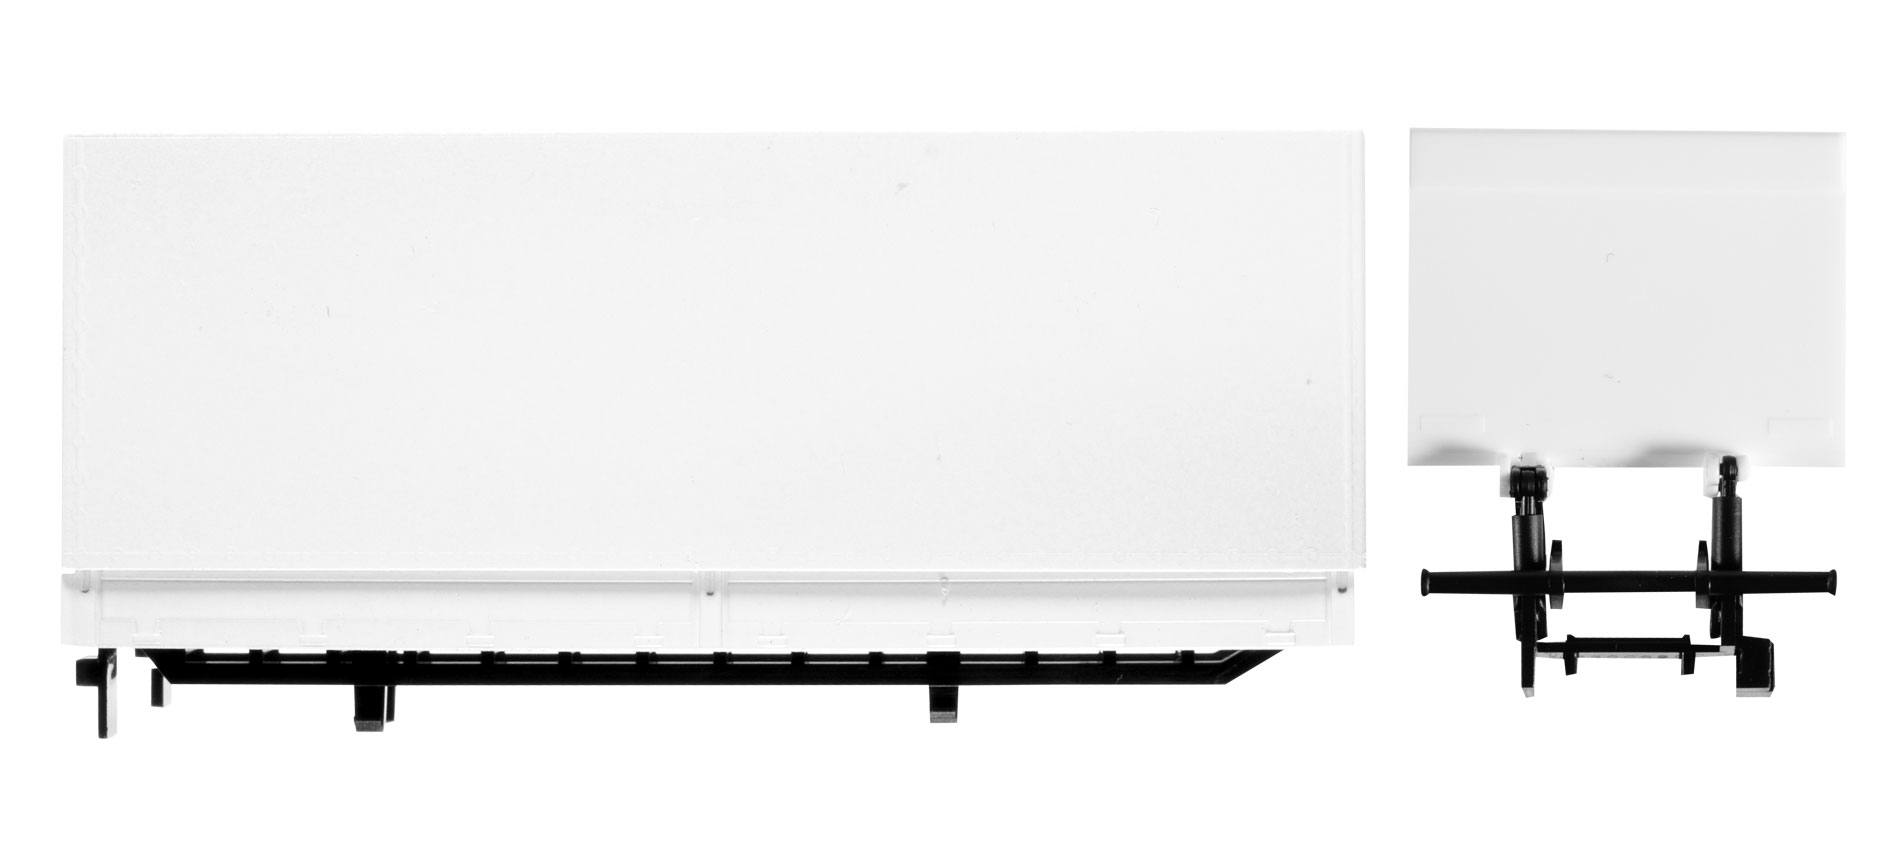 Pick-up/canvas cover for LKW 7,5 t with liftgateContent: 2 pcs.